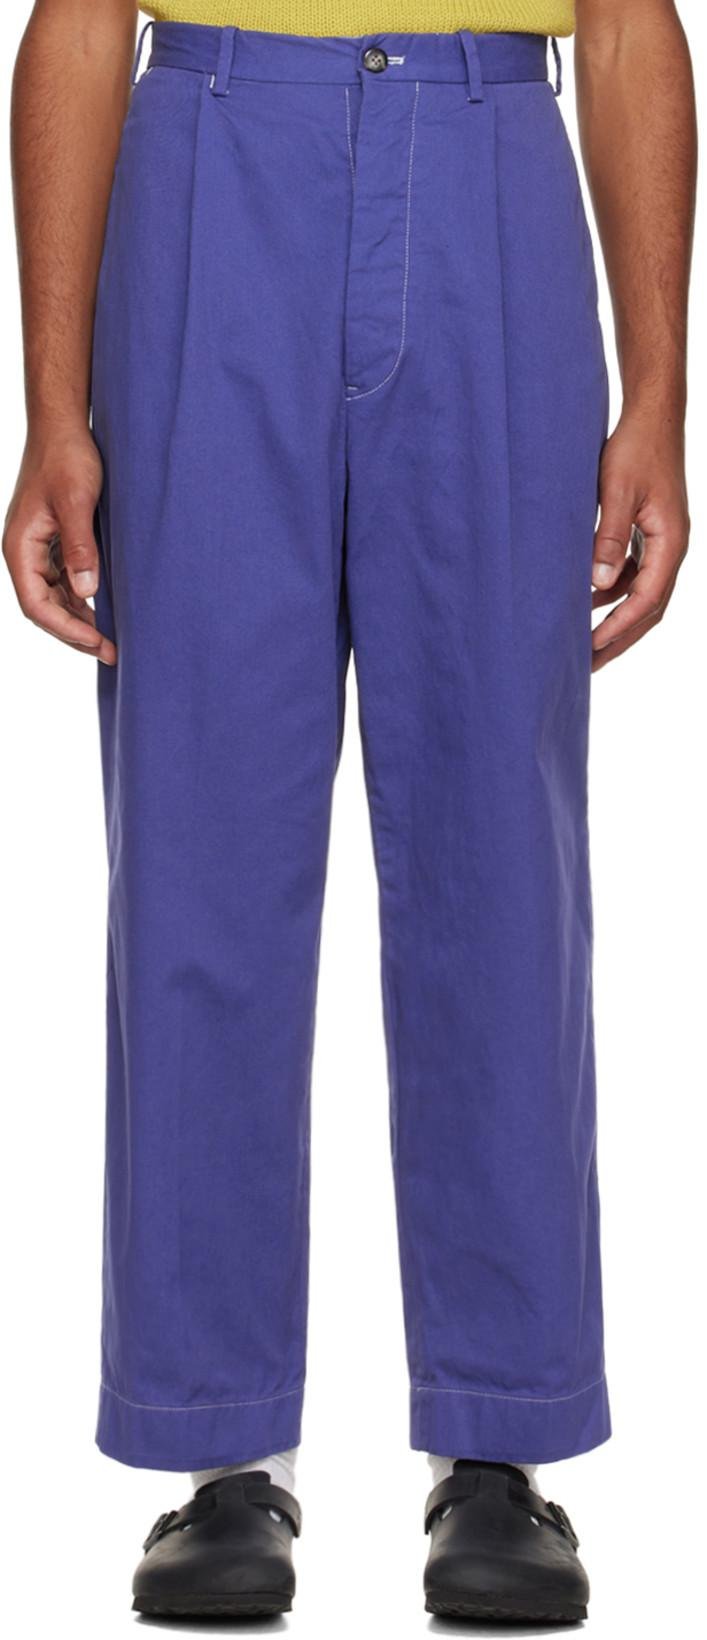 Blue Pleated Trousers by CONNOR MC KNIGHT